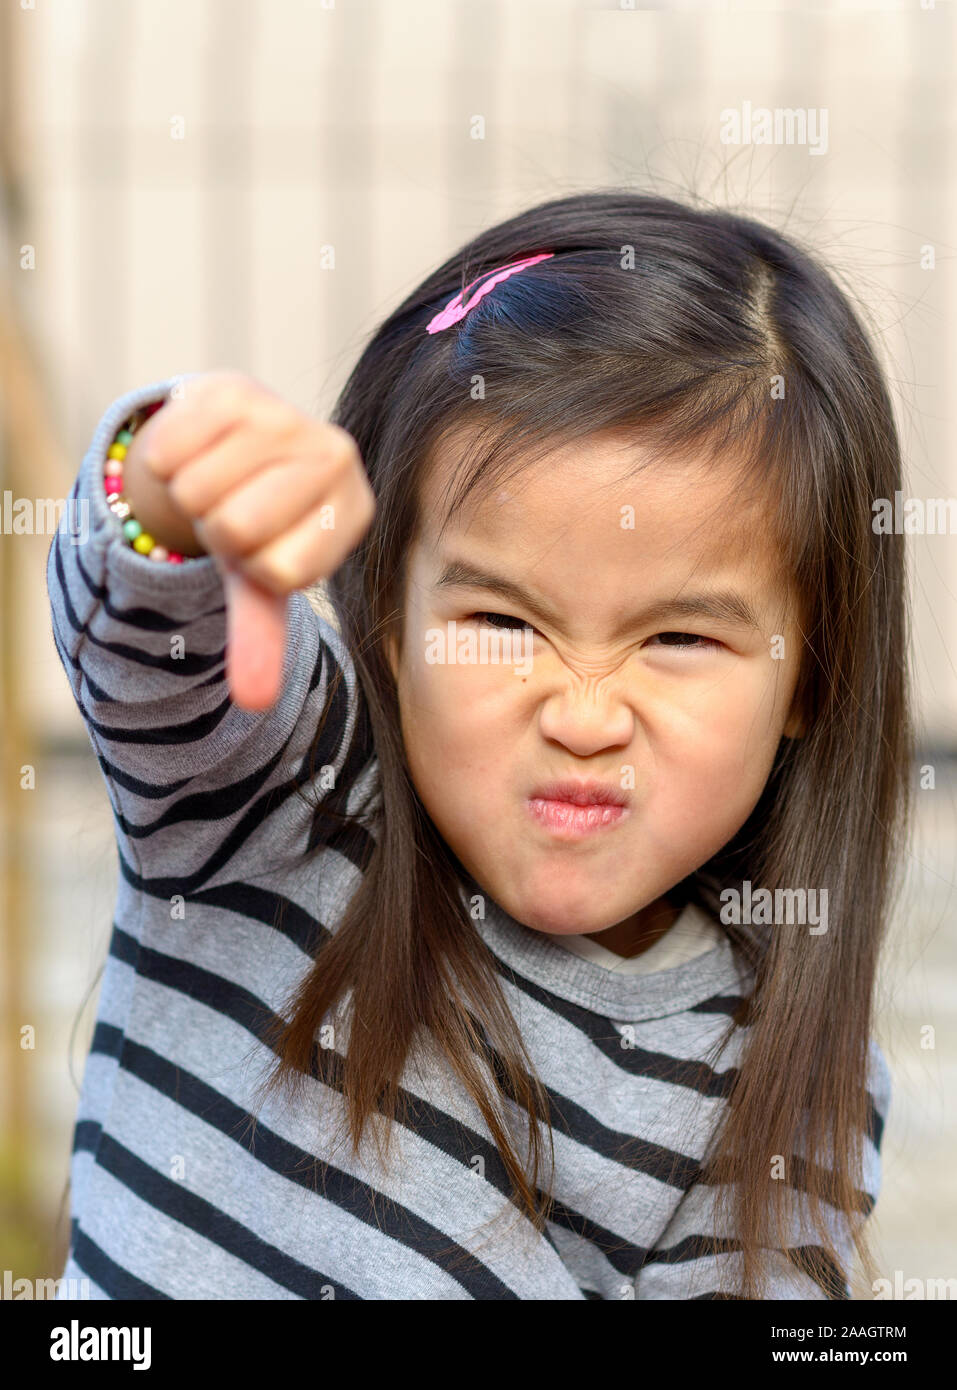 Portrait of a angry little Asian girl giving a thumb down gesture at the camera while pulling a fierce face in a show of childish aggression Stock Photo